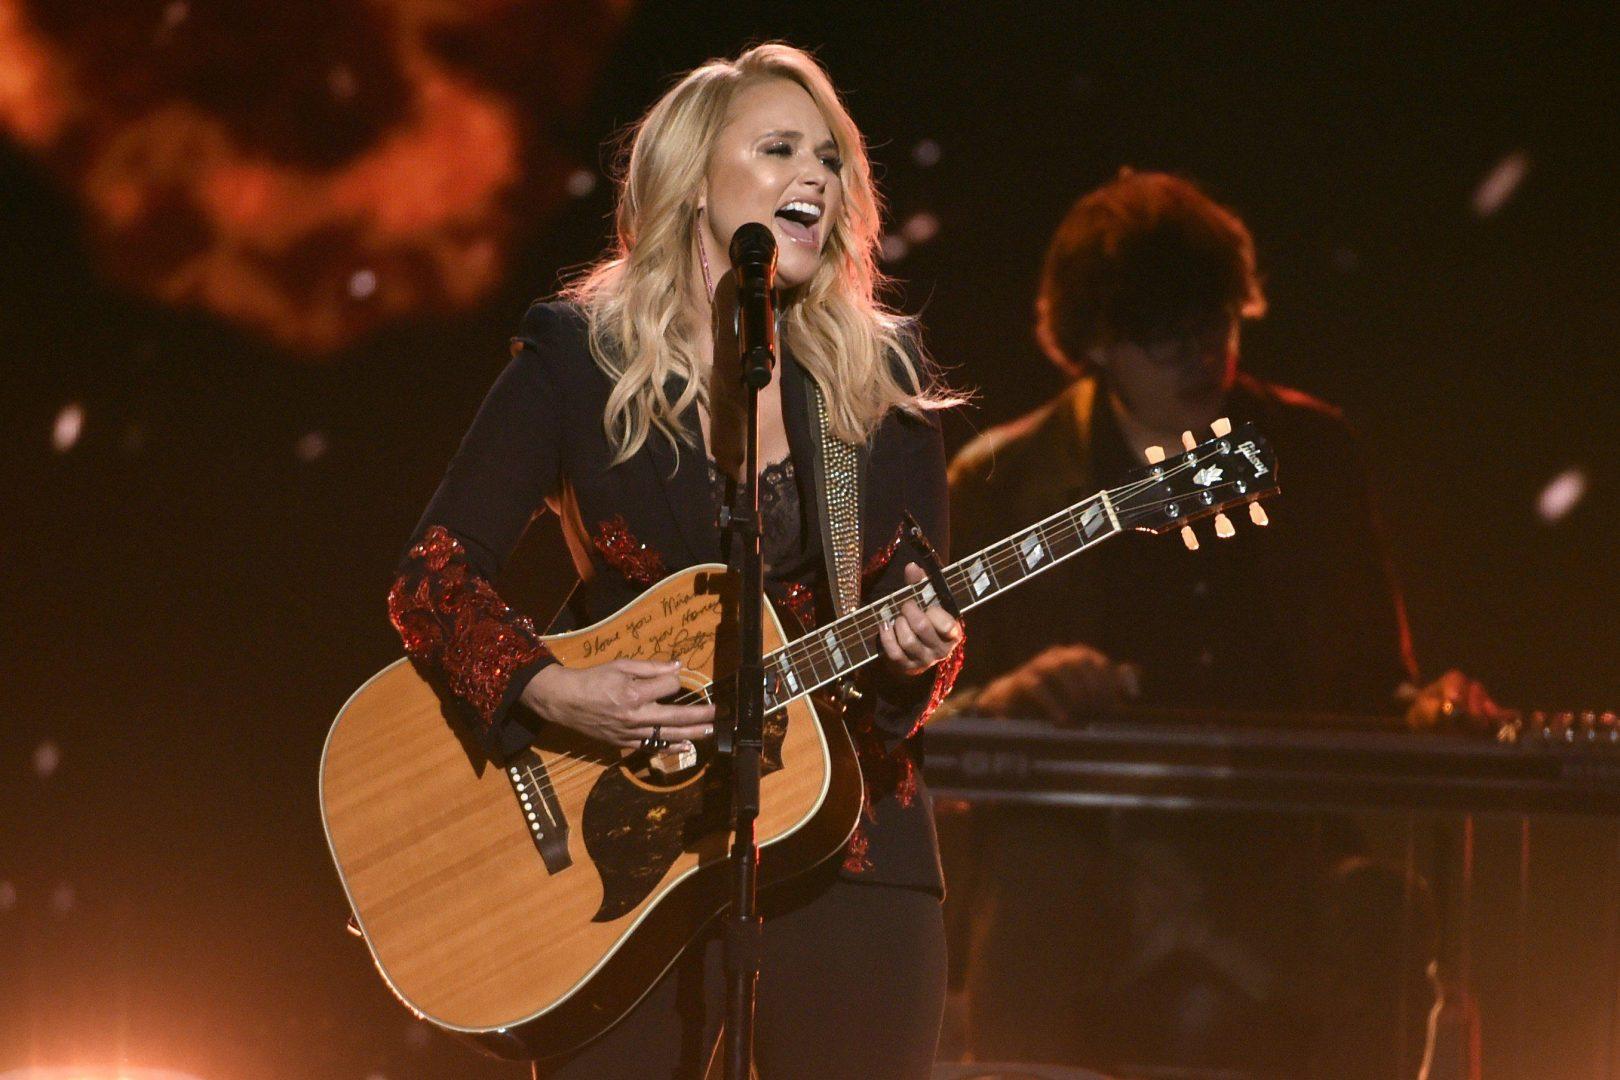 Miranda Lambert was named Recording Industry Association of America’s 2019 Artist of the Year. [Chris Pizzello/Invision]
Courtesy of: Tribune News Service